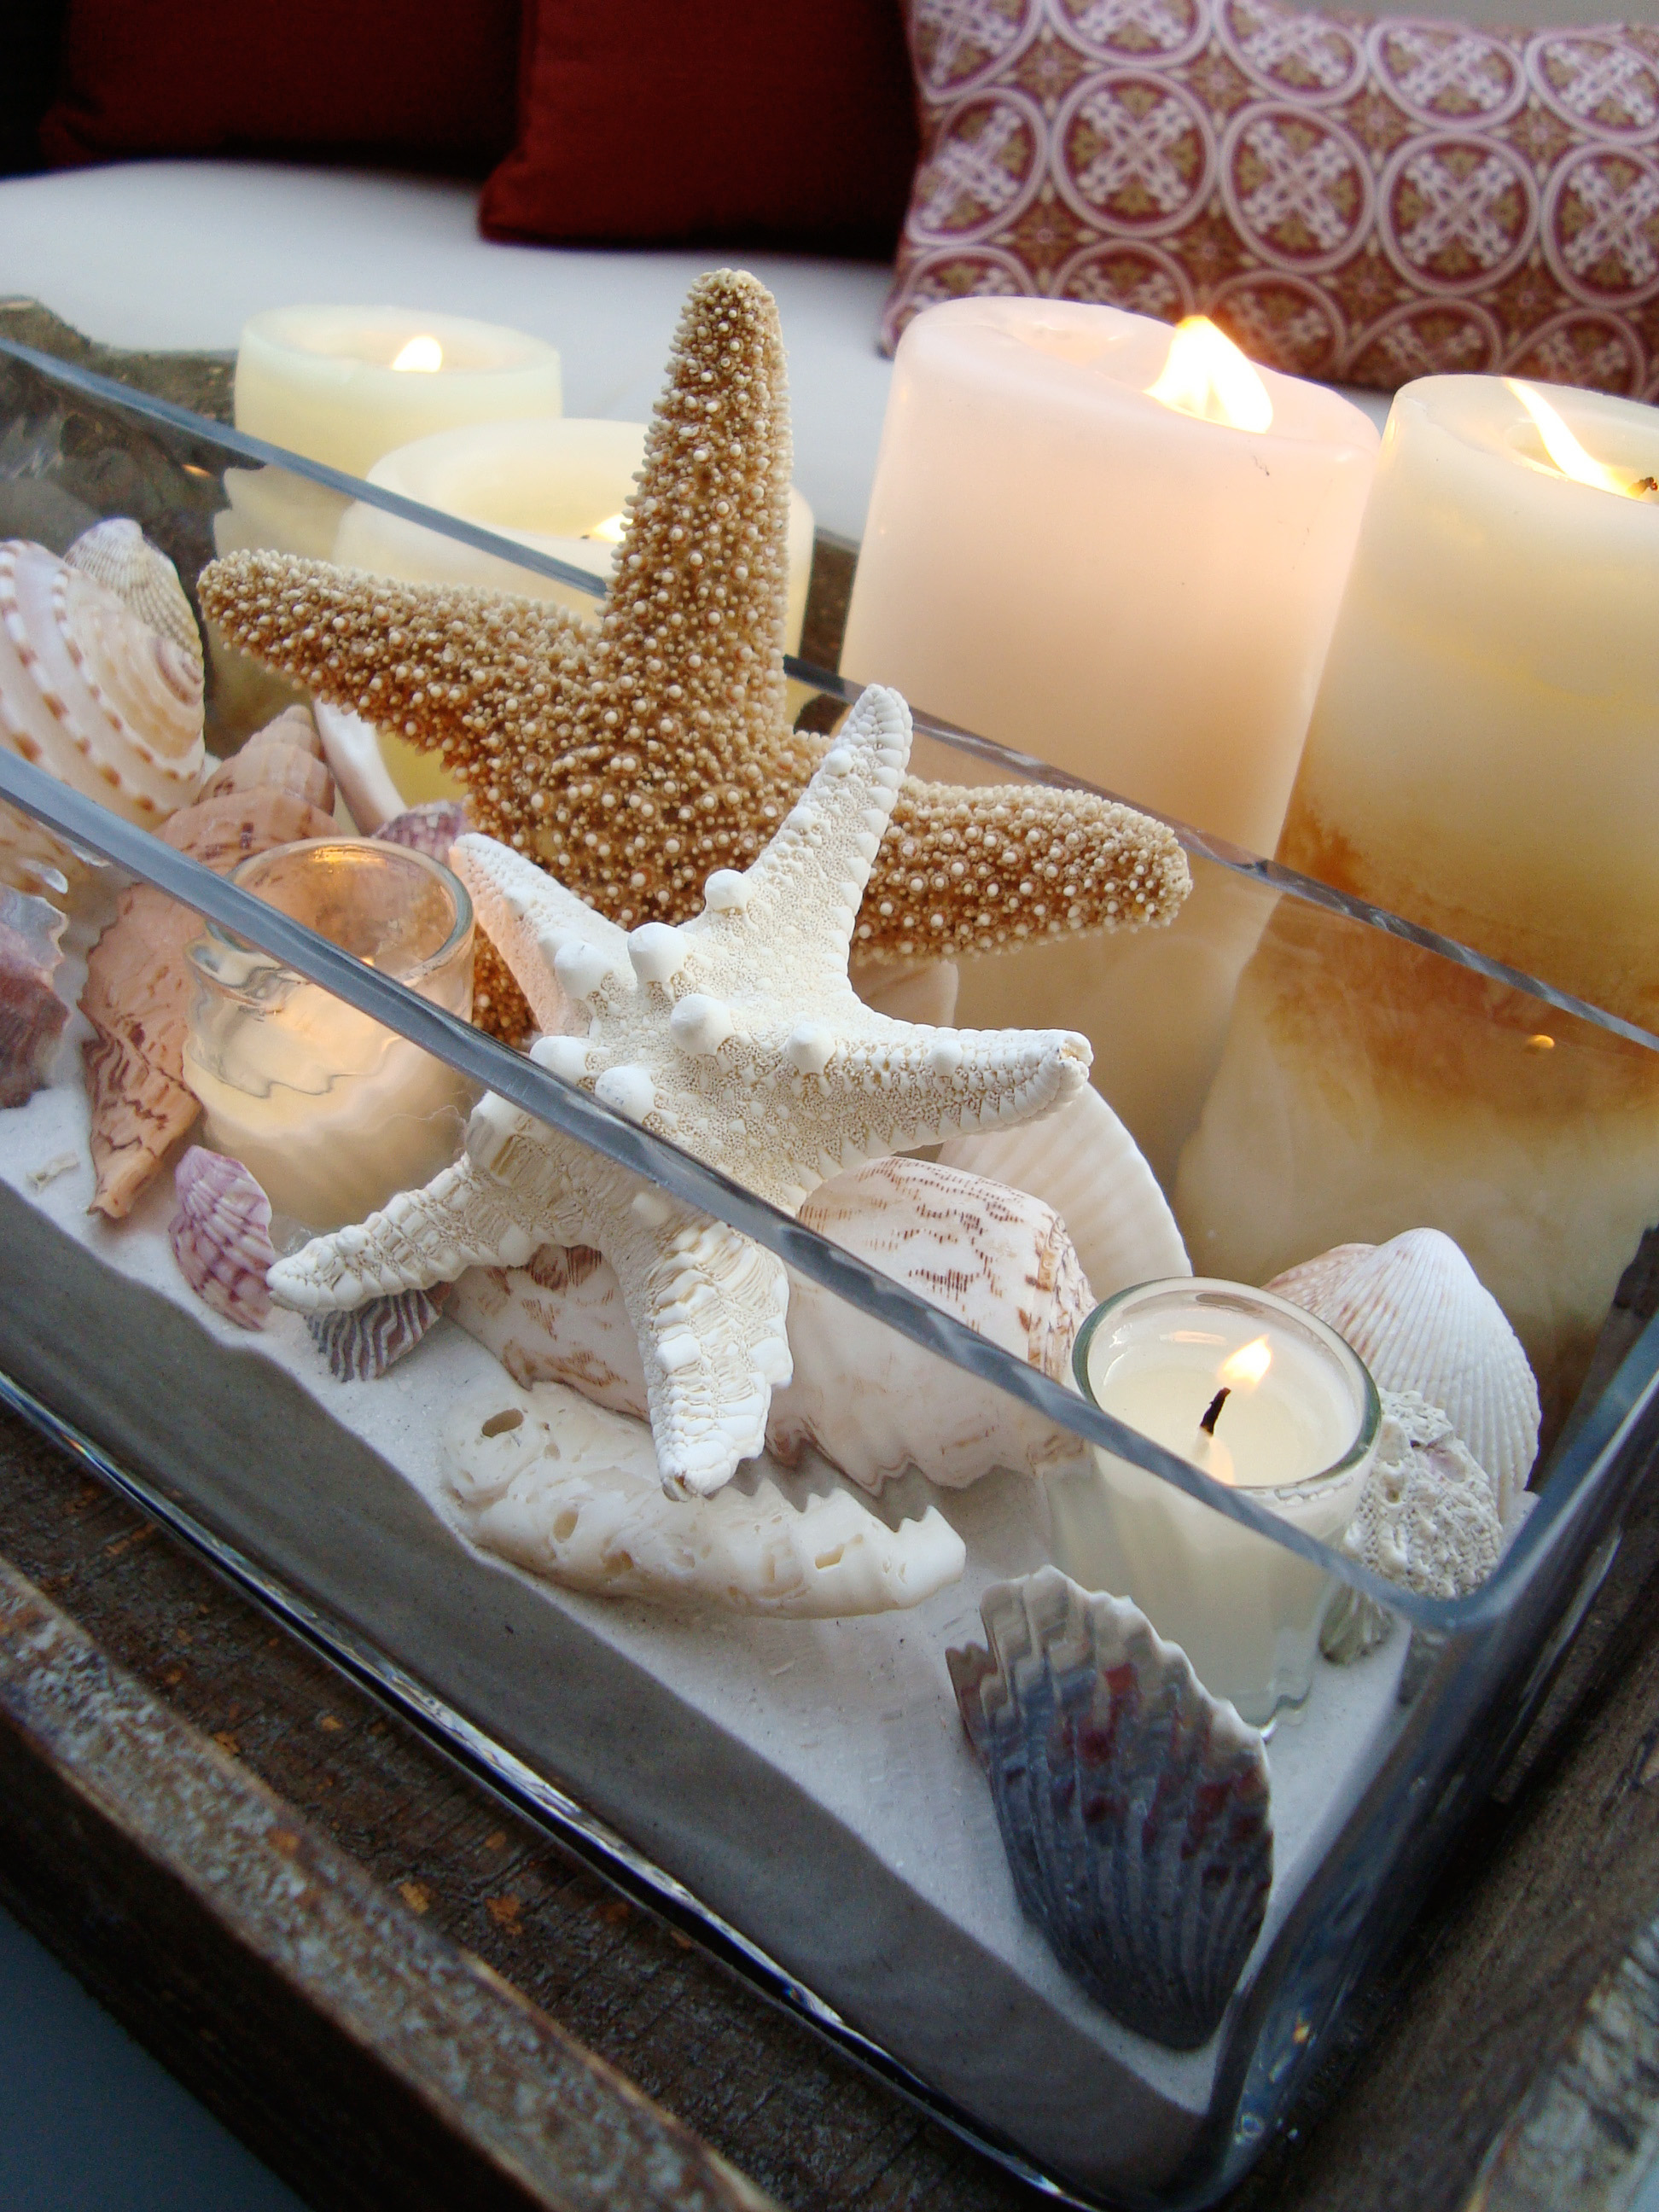 pcs Famoby Sea Shells Mixed Beach Seashells Starfish for Beach Theme Party Wedding Decorations DIY Crafts Candle Making Fish Tank Vase Fillers Home Decorations Supplies 70 